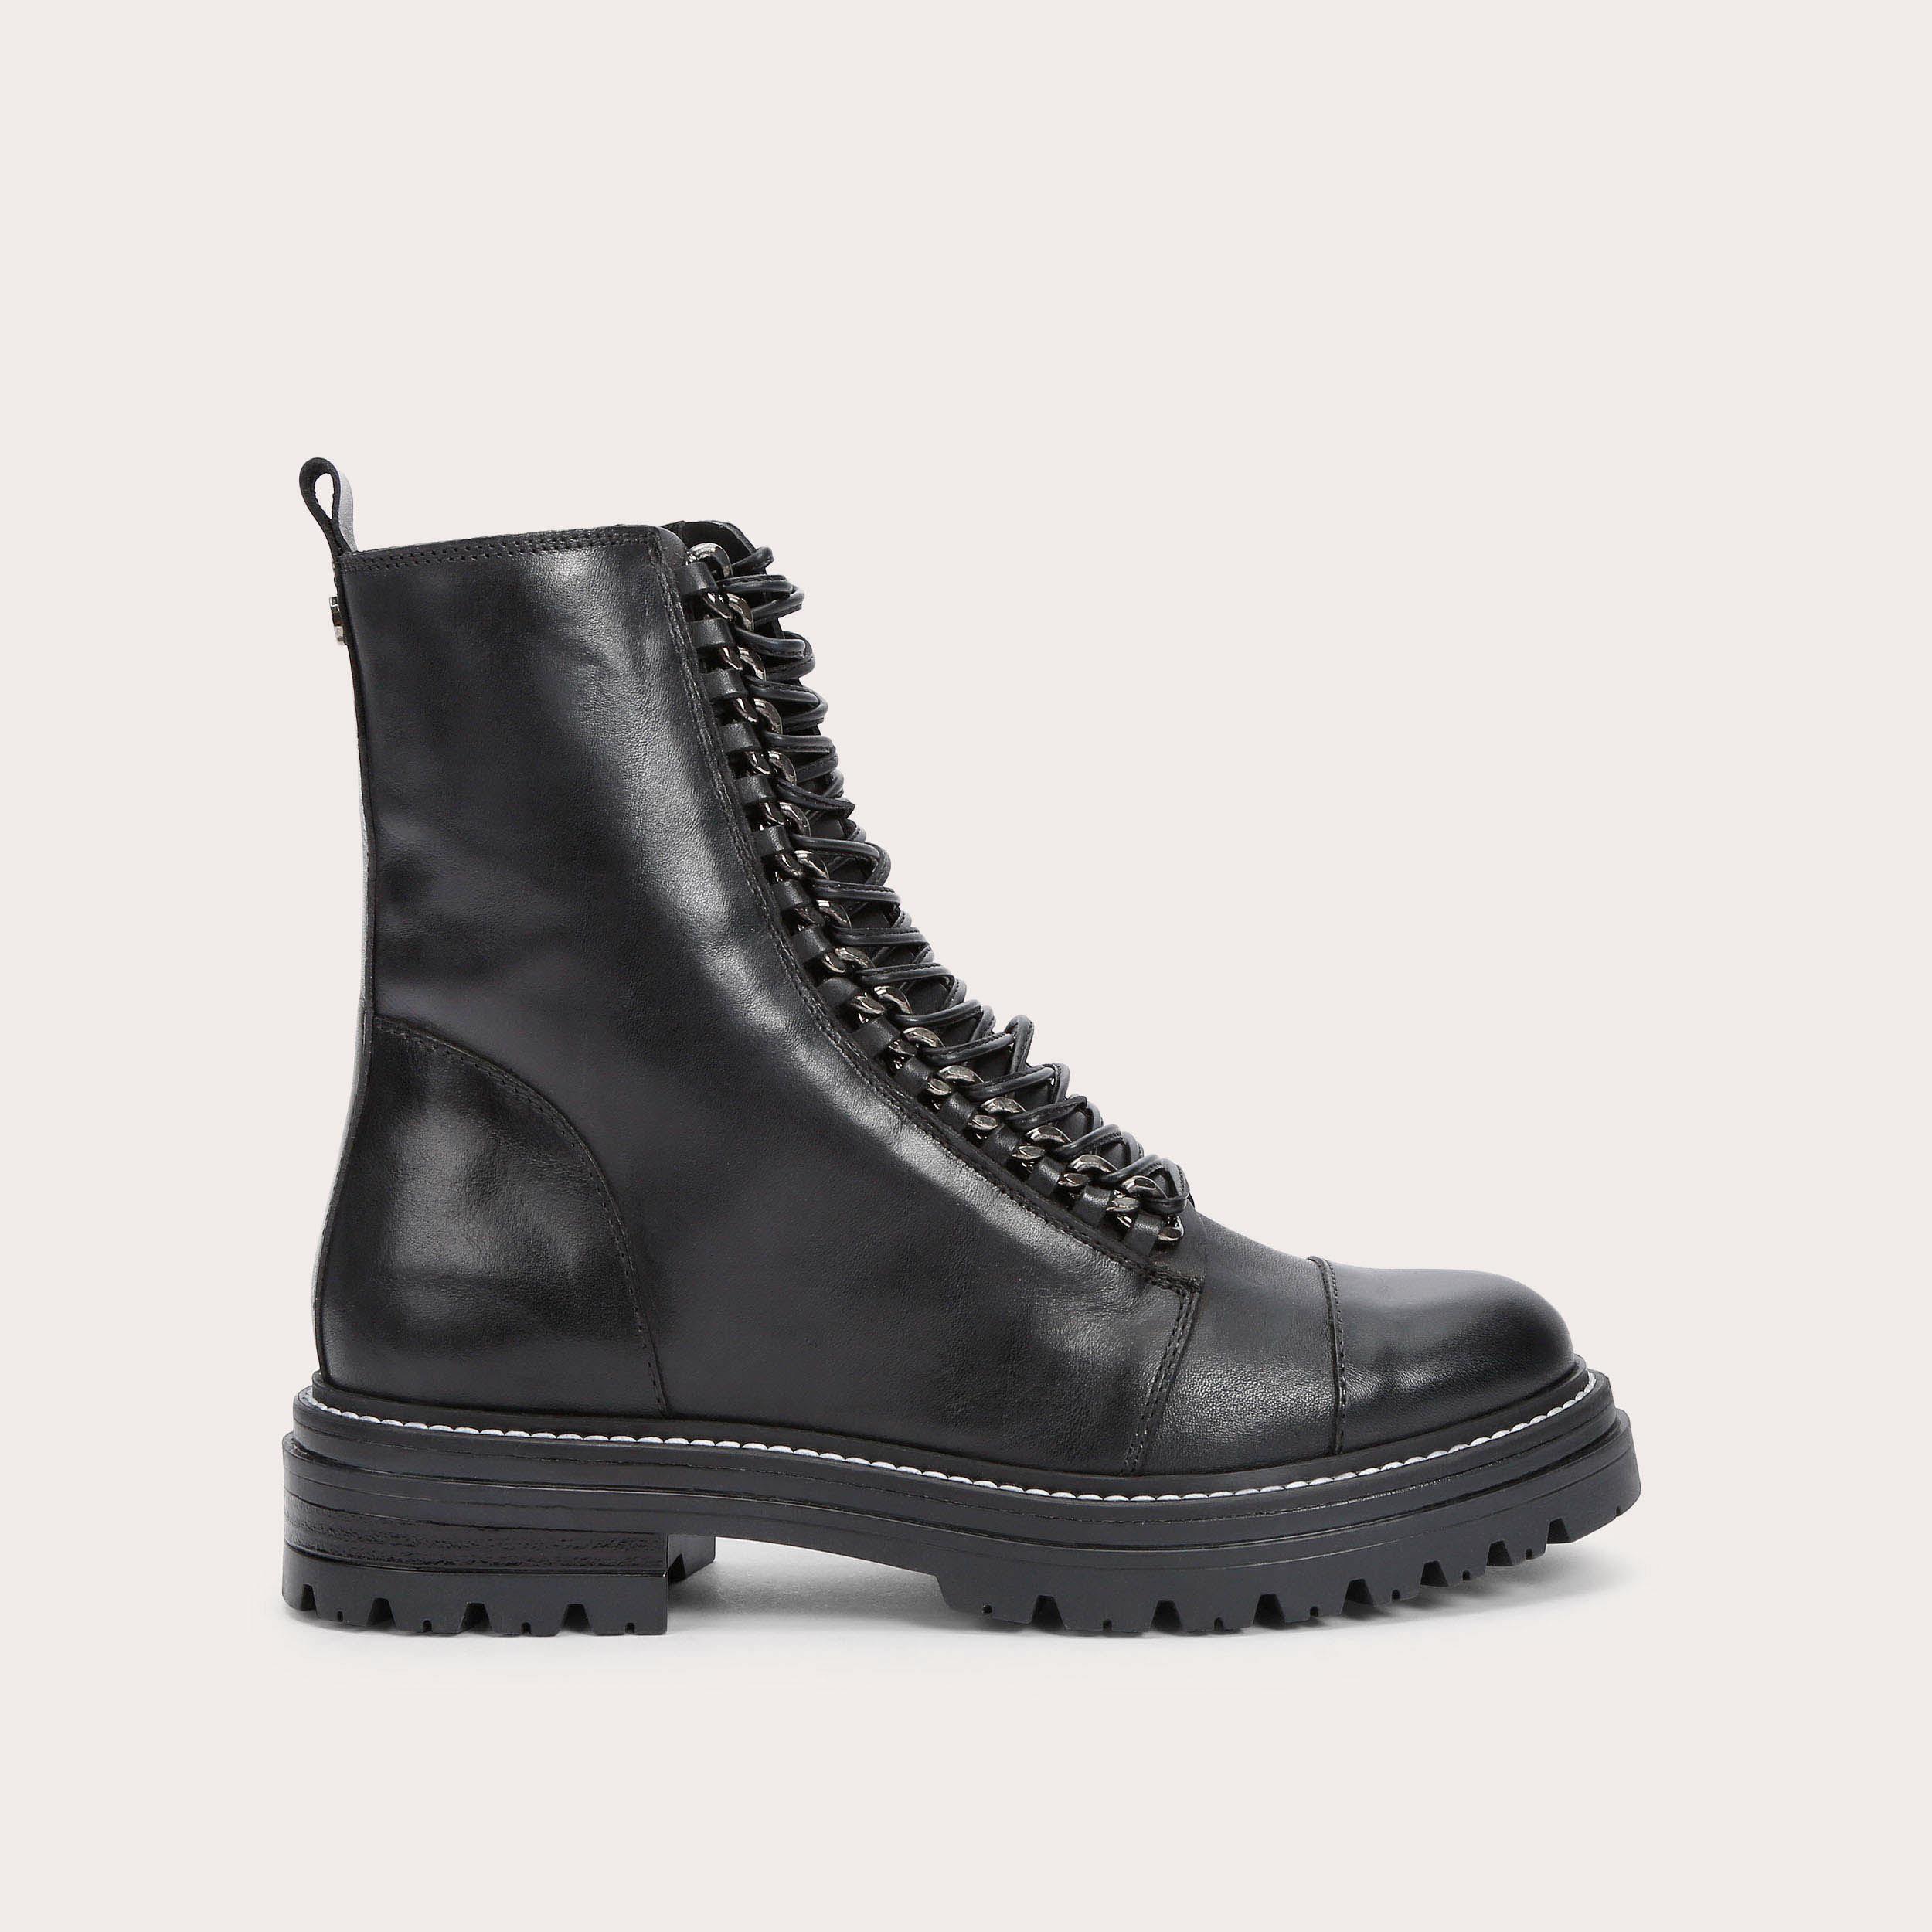 SULTRY CHAIN Black Leather Biker Boots by CARVELA